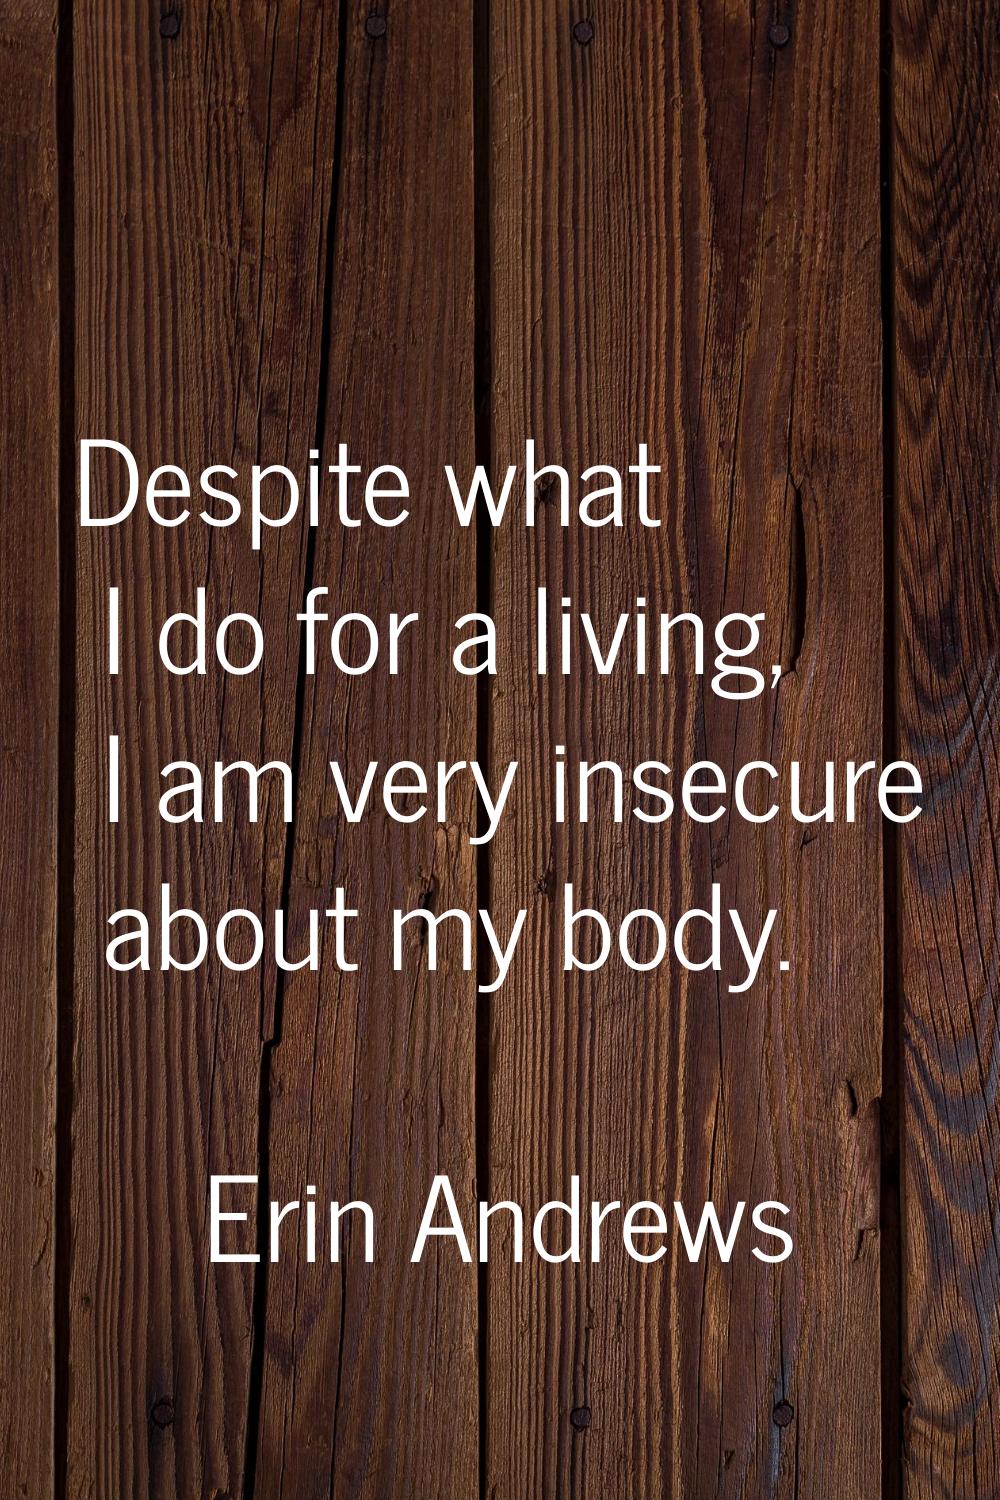 Despite what I do for a living, I am very insecure about my body.